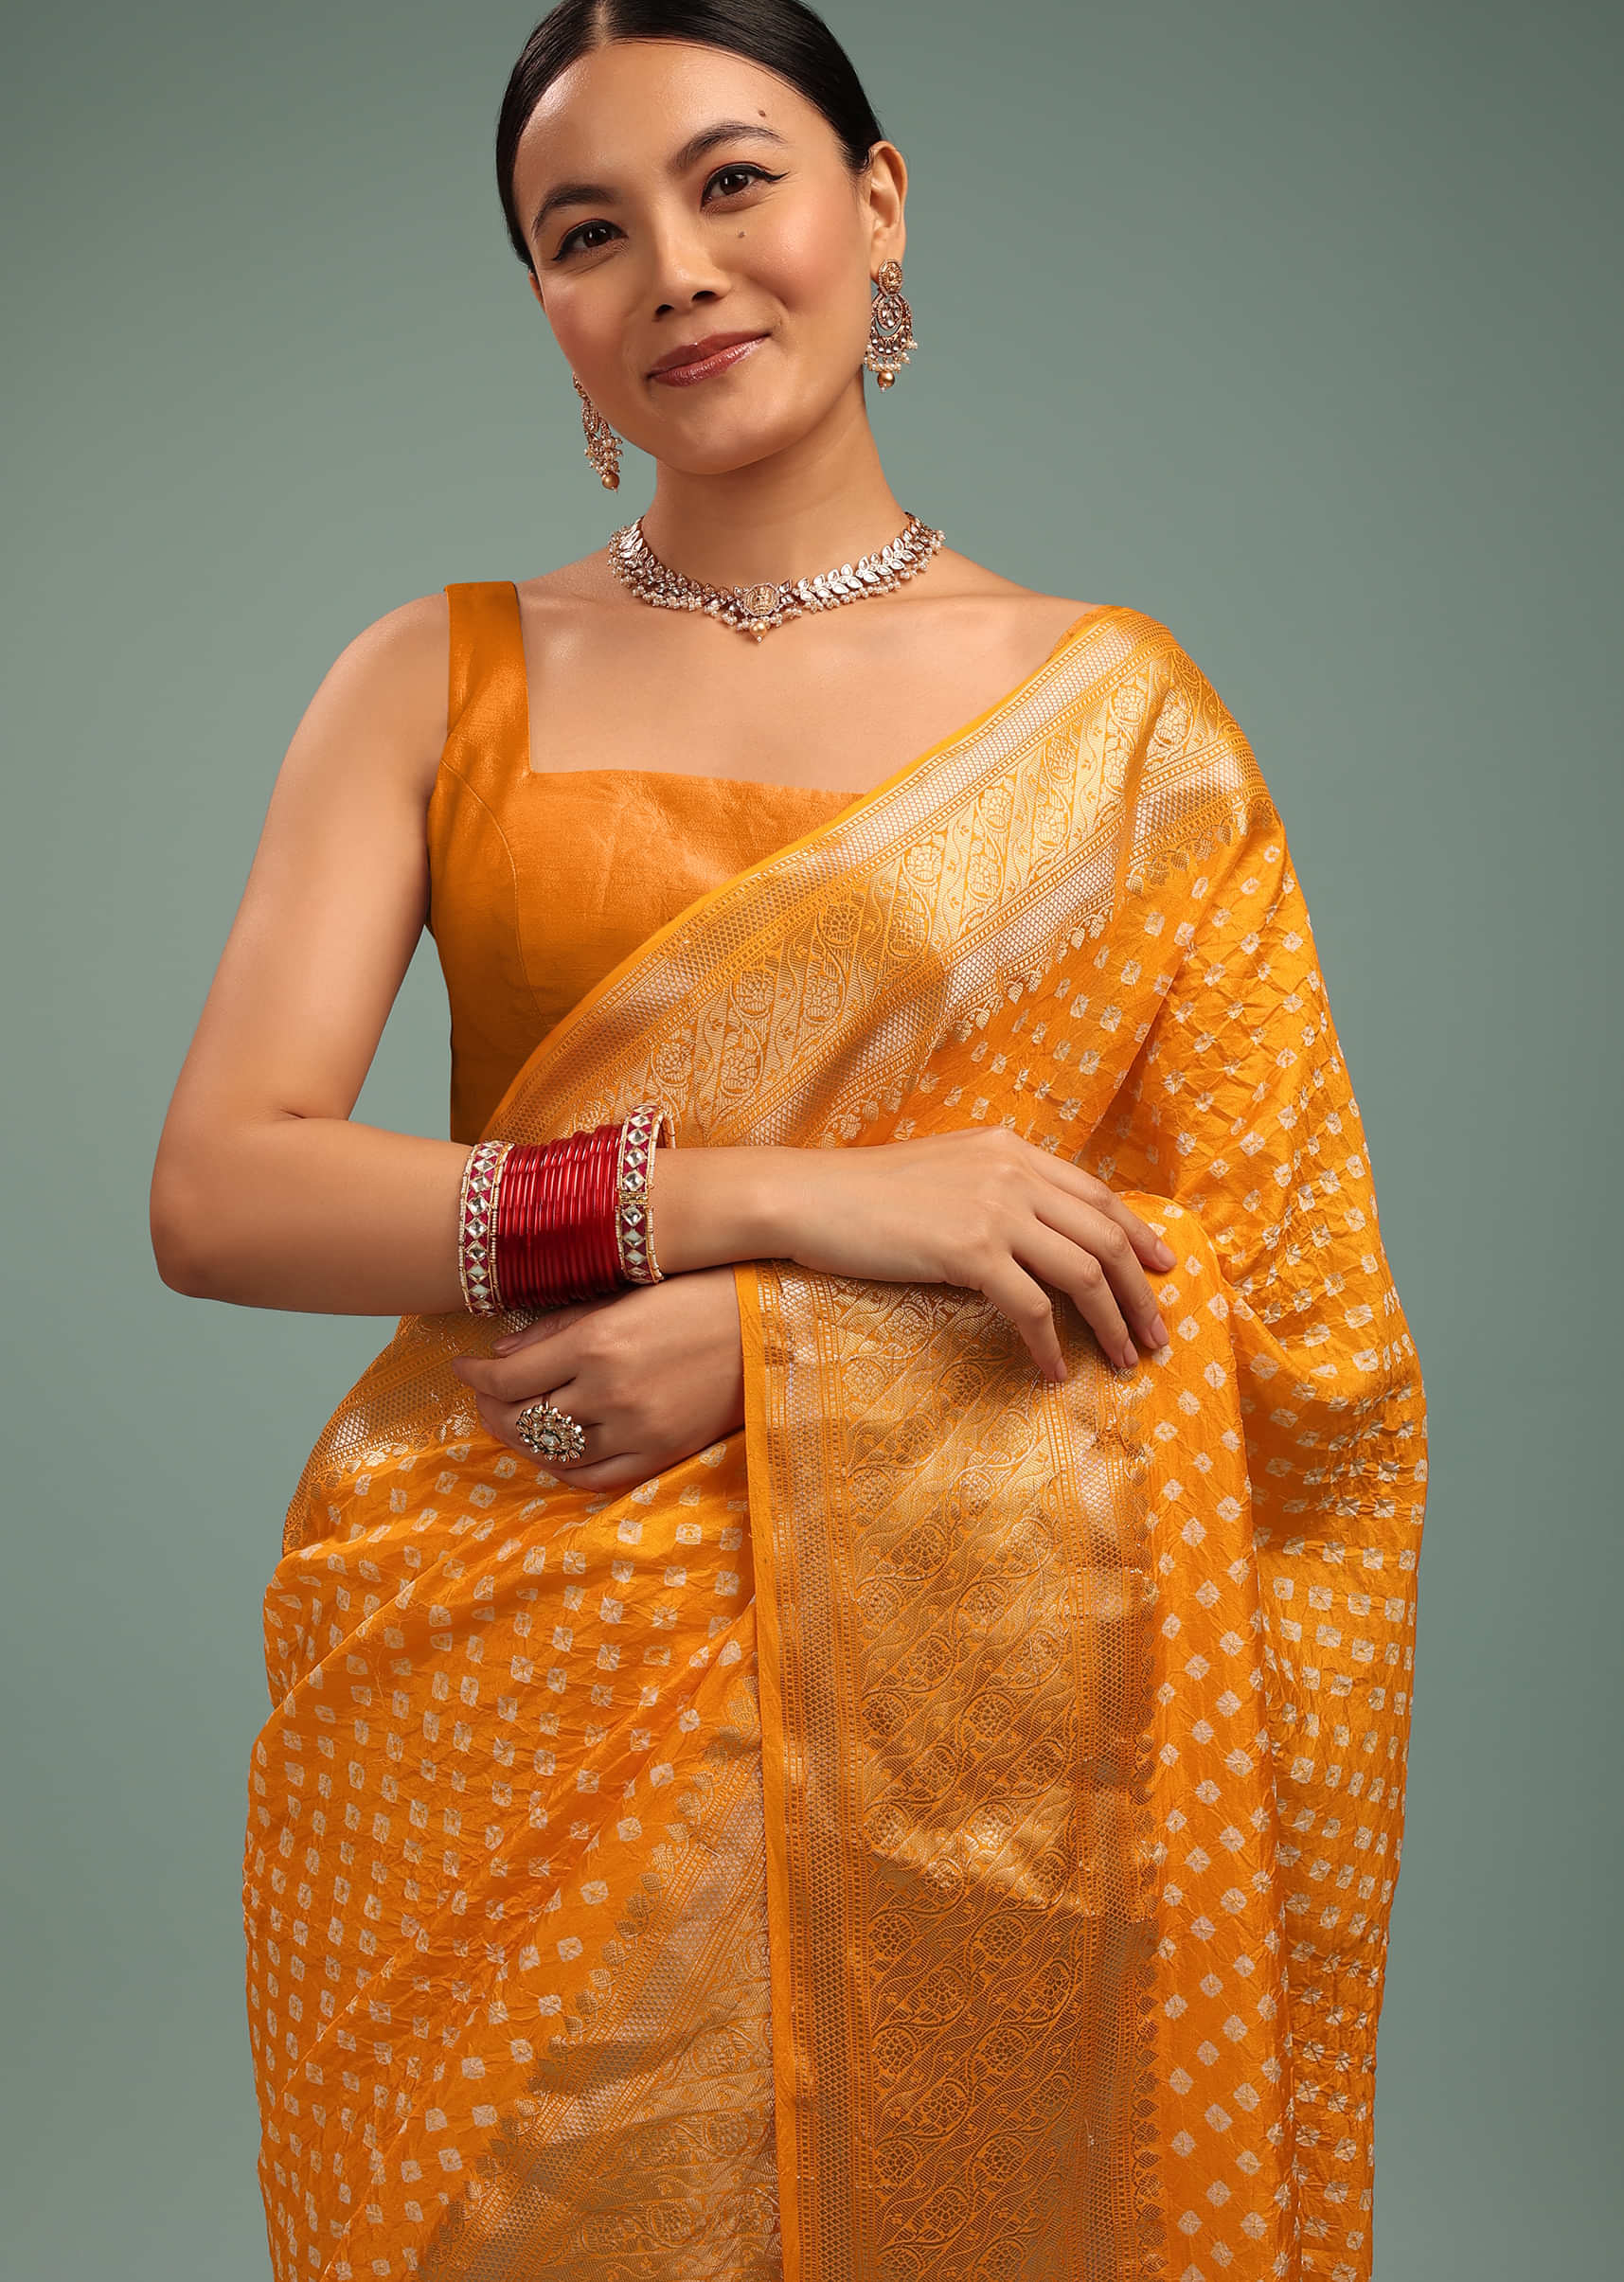 Honey Yellow Saree In Silk With Bandhani Print & Handwoven Brocade Floral Embroidery